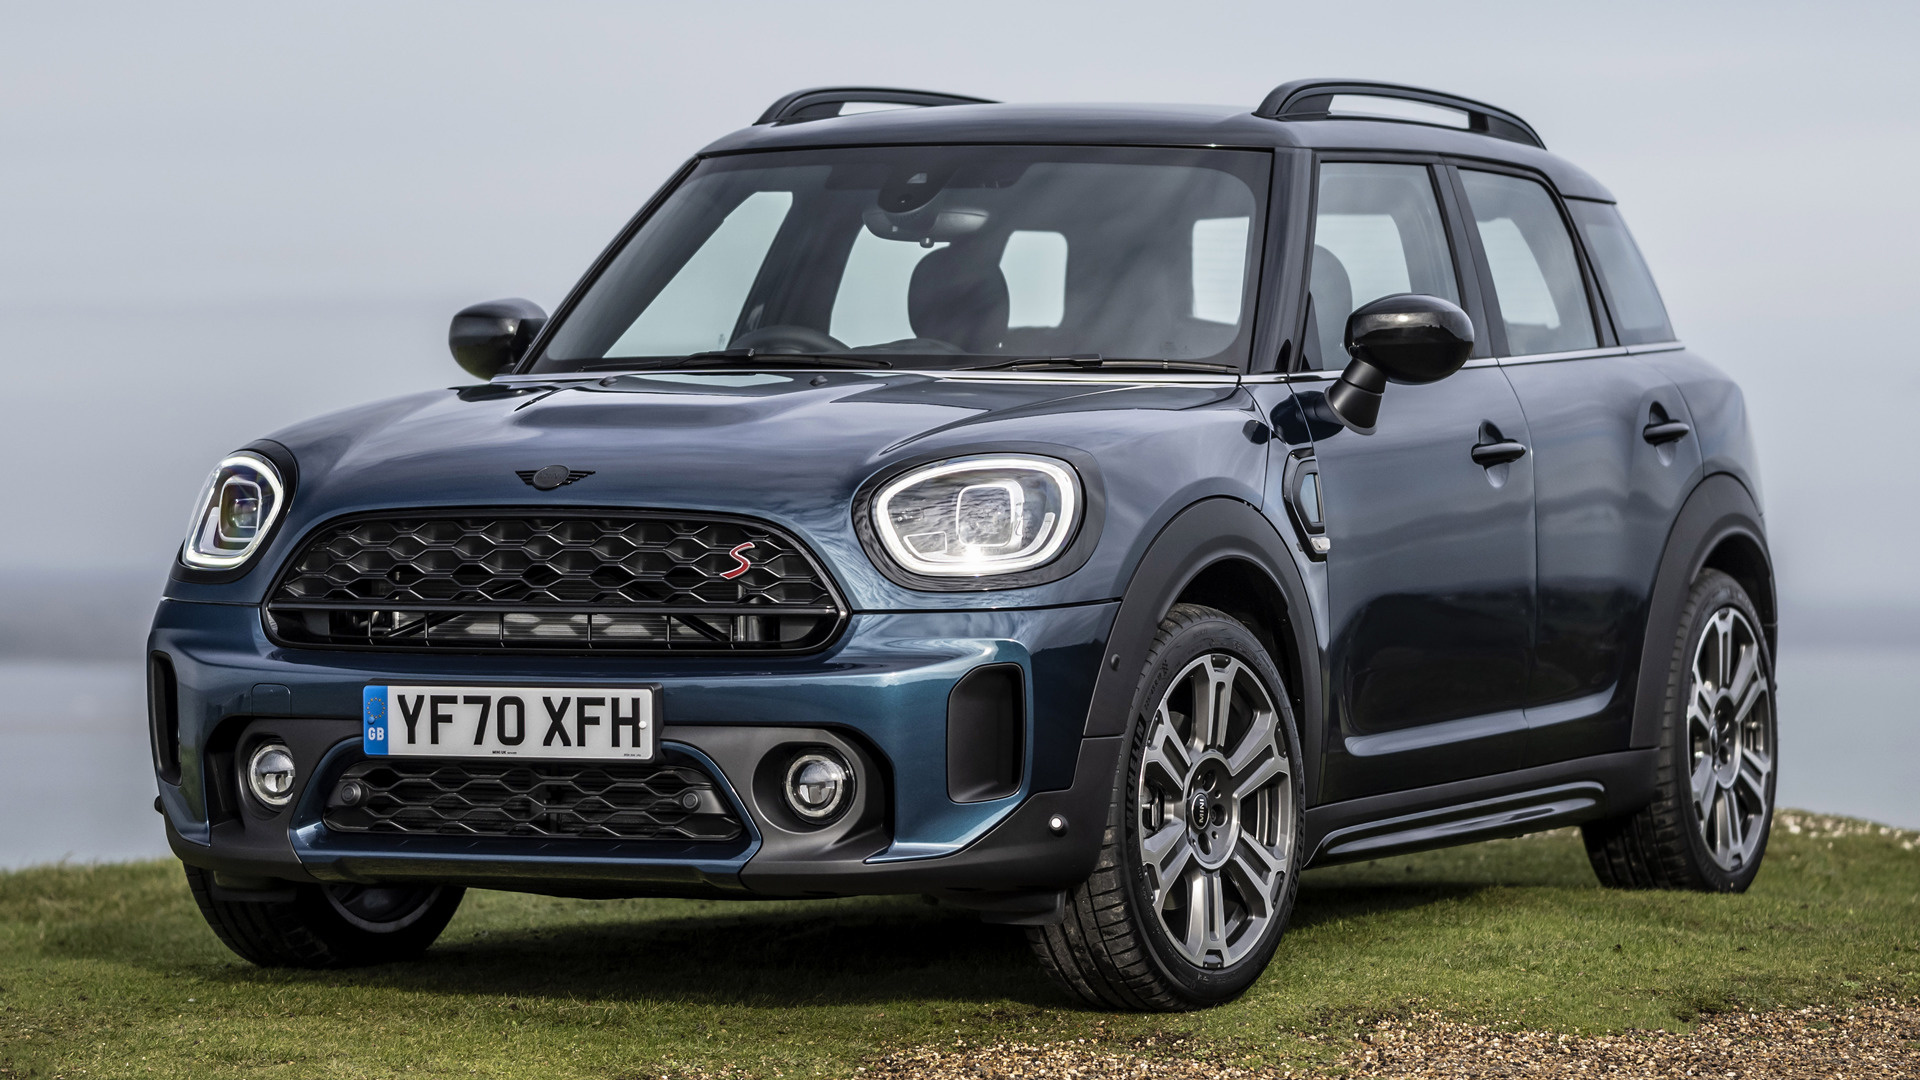 2020 Mini Cooper S Countryman Boardwalk (UK) - Wallpapers and HD Images ...